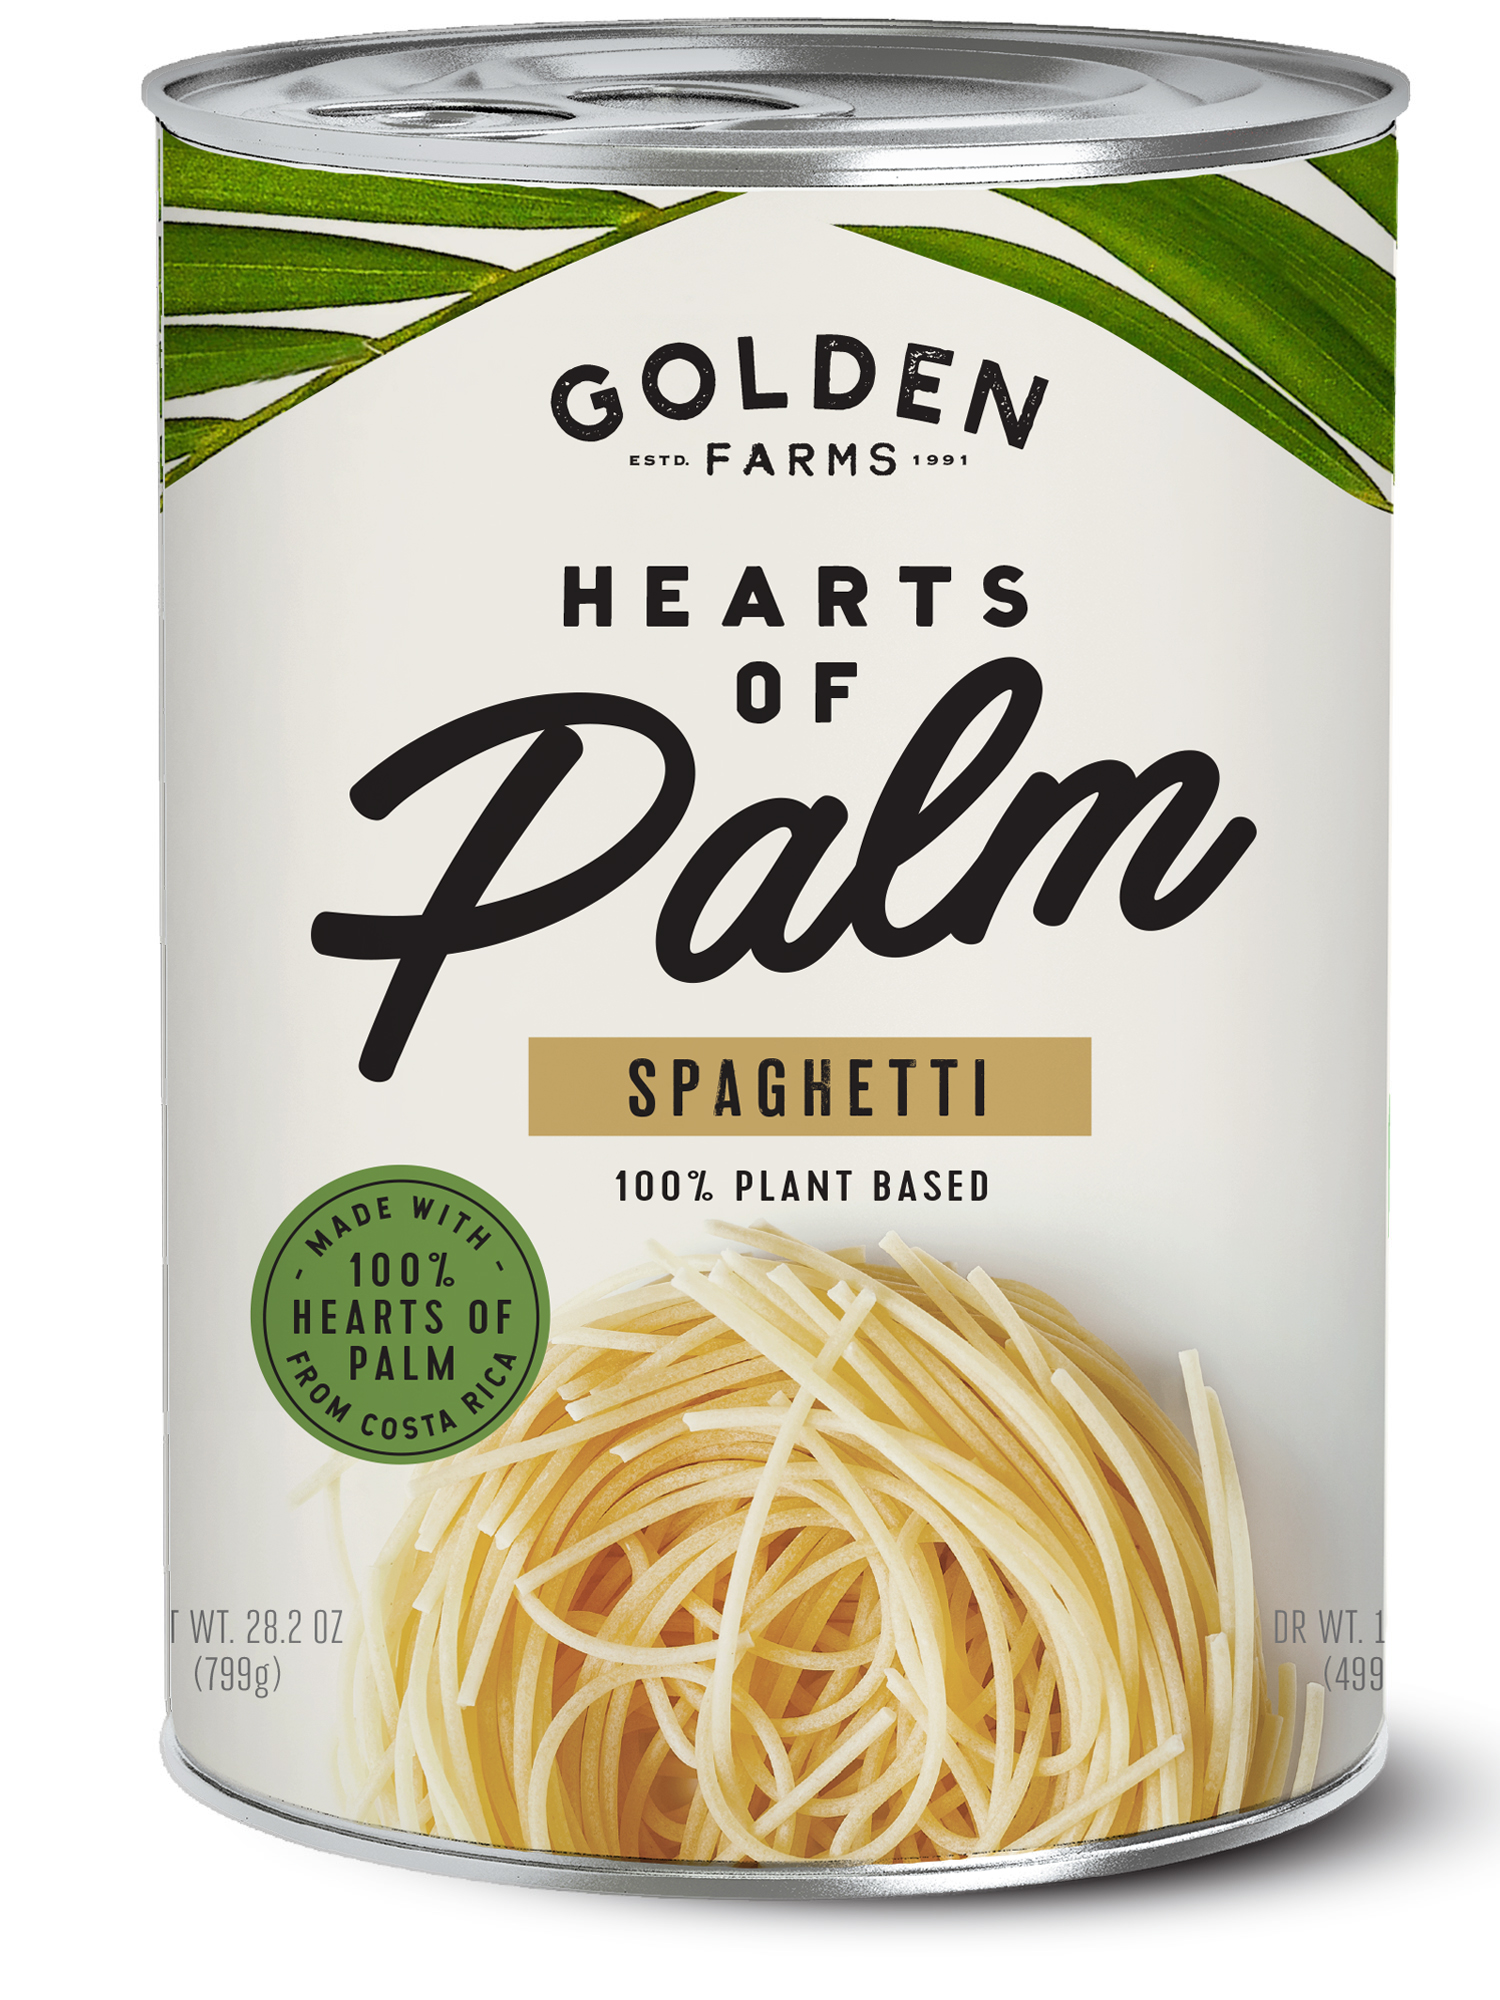 What Is Heart of Palm?